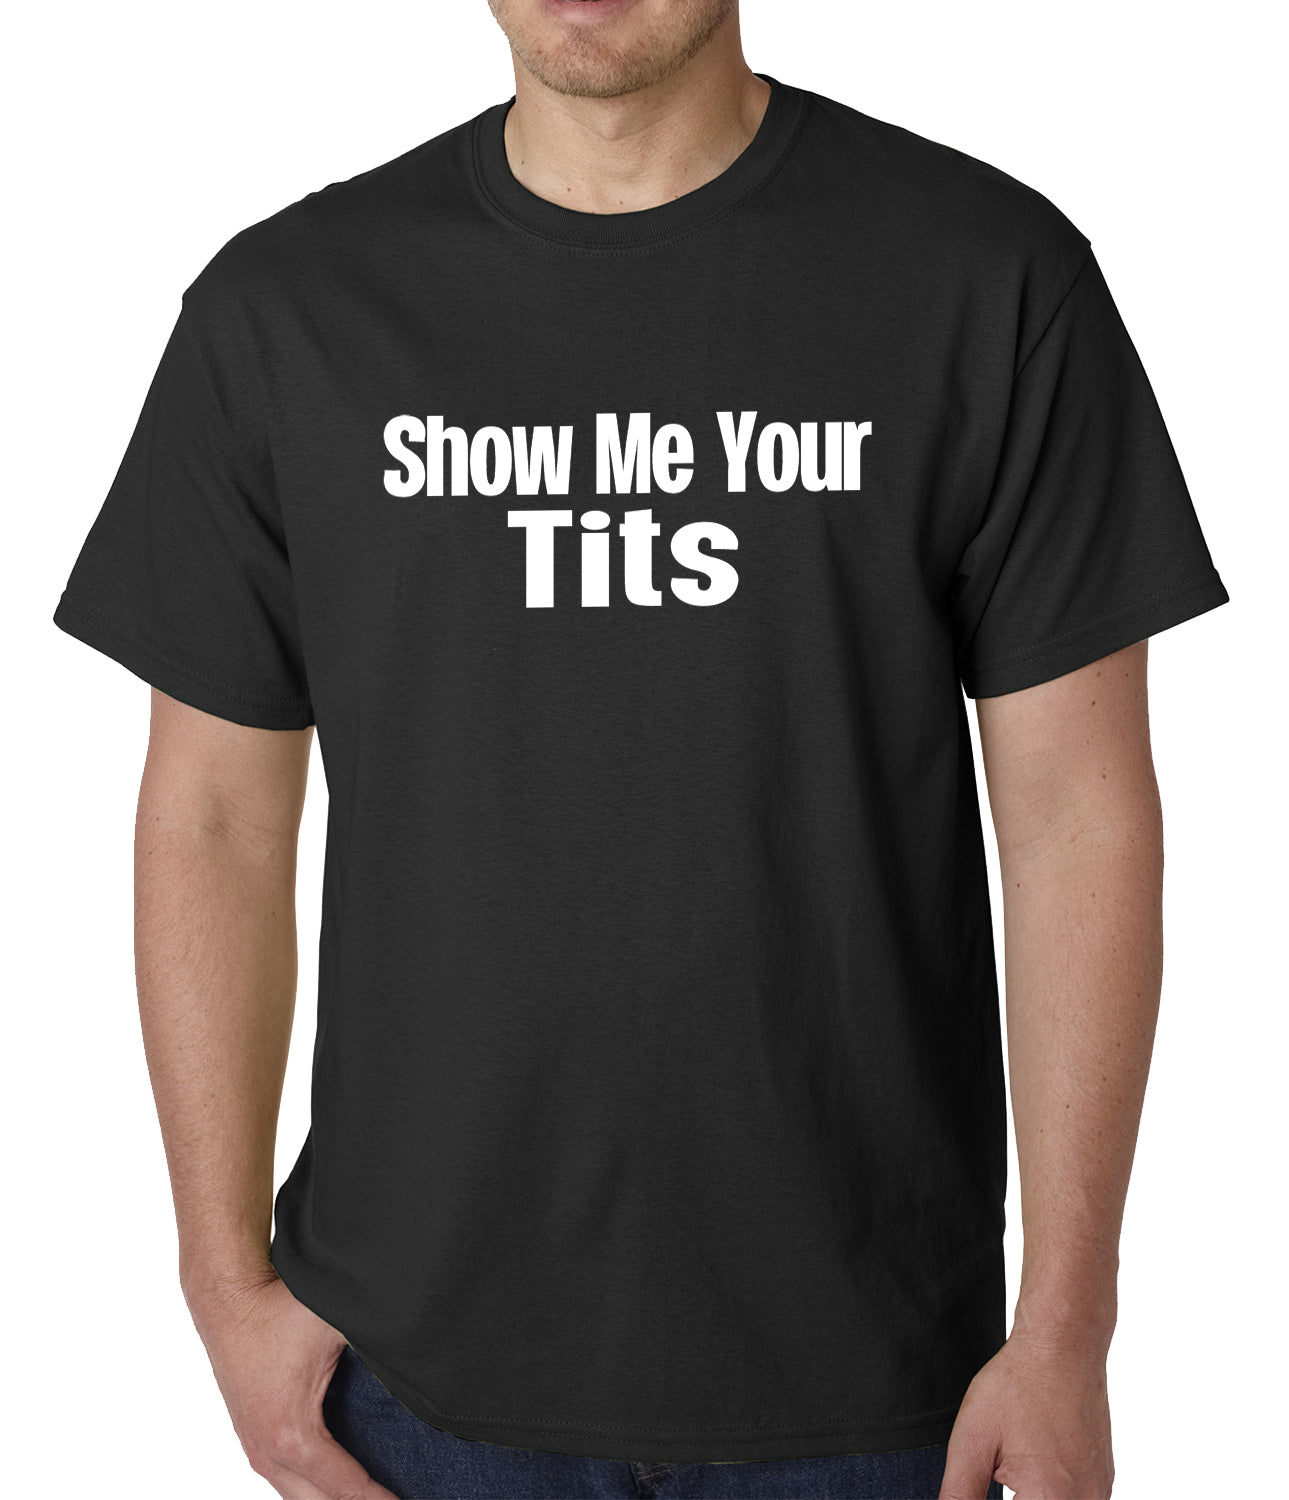 carlos miguel bernabe recommends Show Me Your Titis